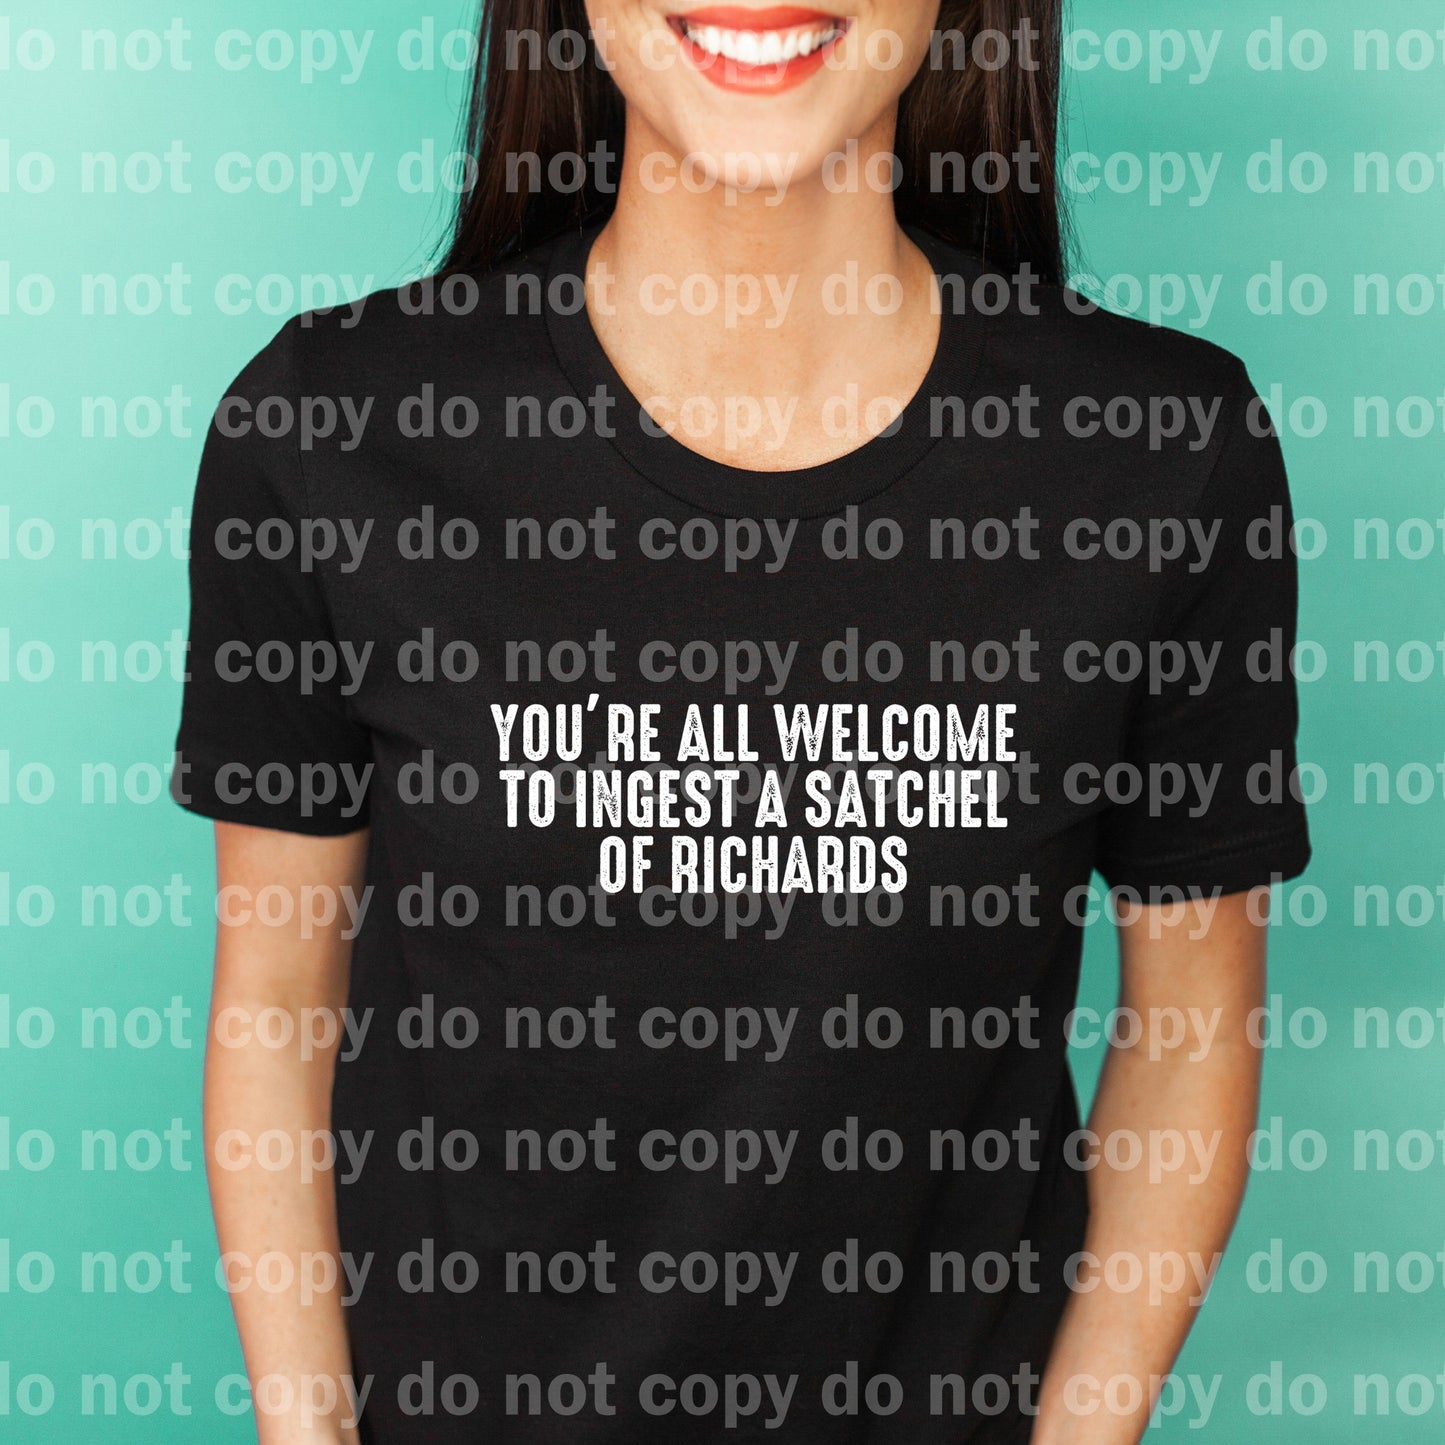 You're All Welcome To Ingest A Satchel Of Richards Black/White Font Dream Print or Sublimation Print